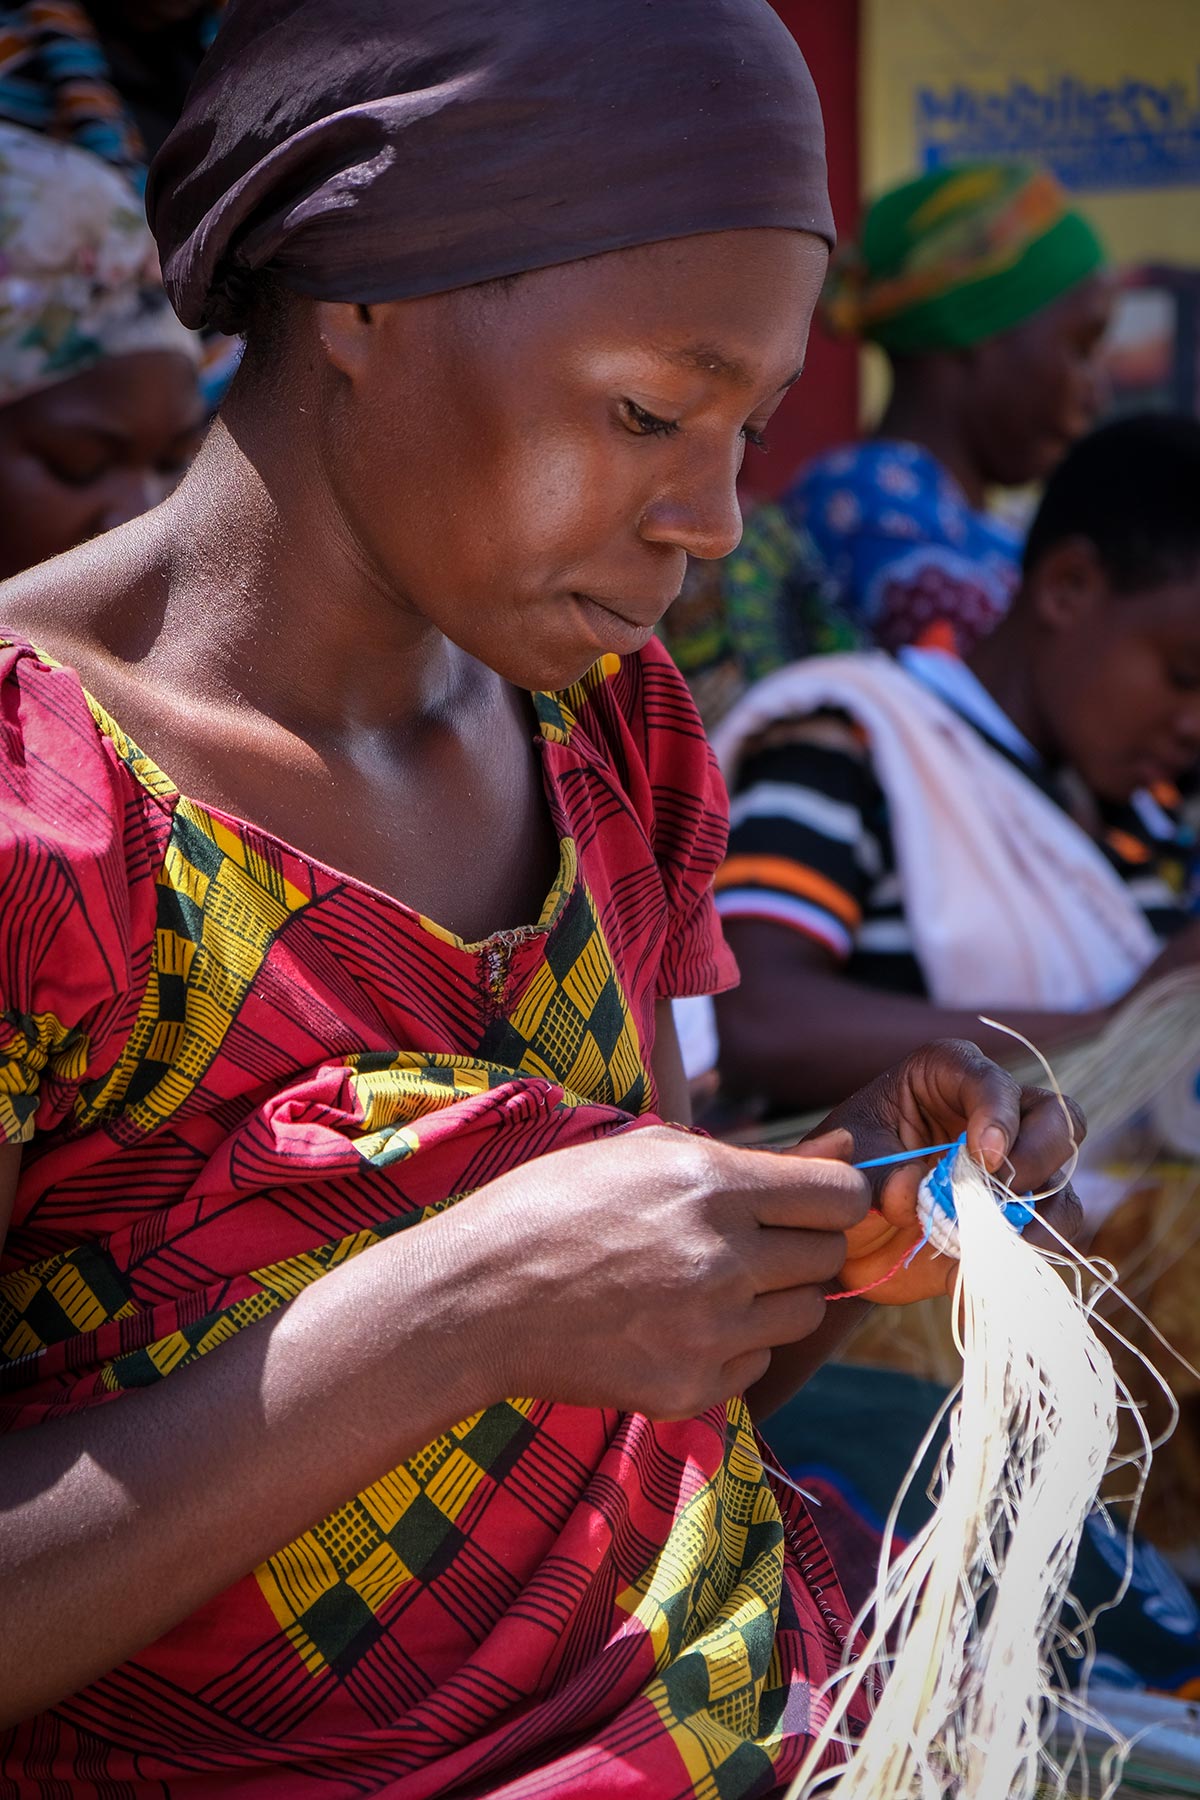 Members of Péline’s cooperative make woven baskets for additional income.